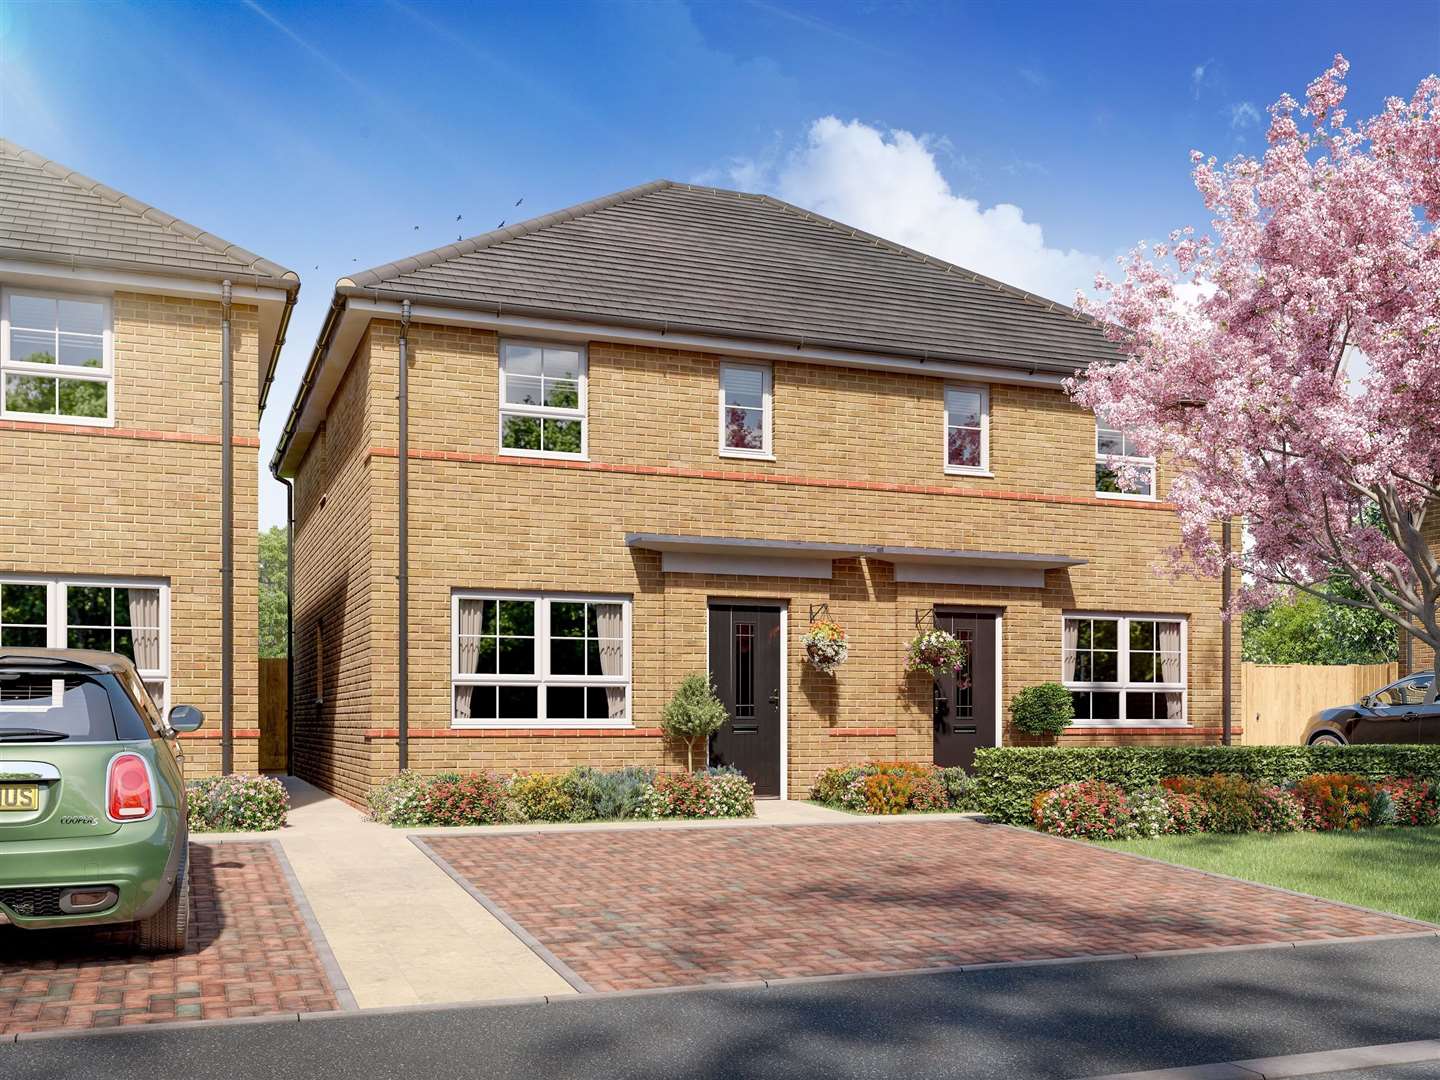 An example of the new homes at Richmond Park. Picture: Barratt Homes